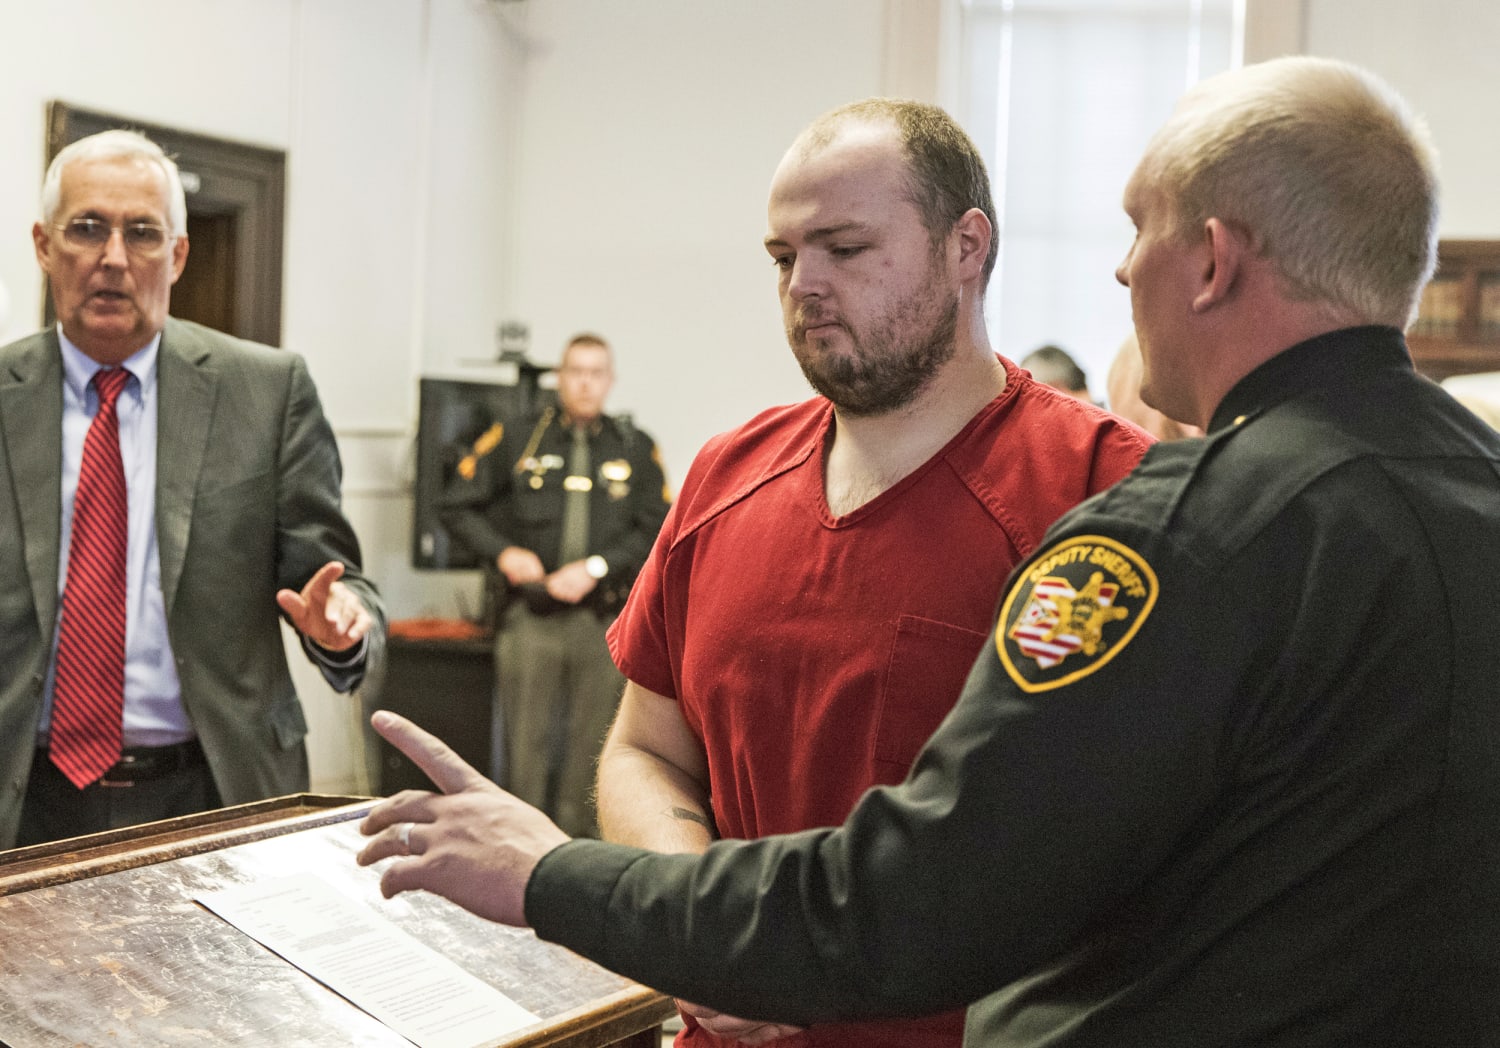 Ohio man found guilty in trial over family massacre of 8